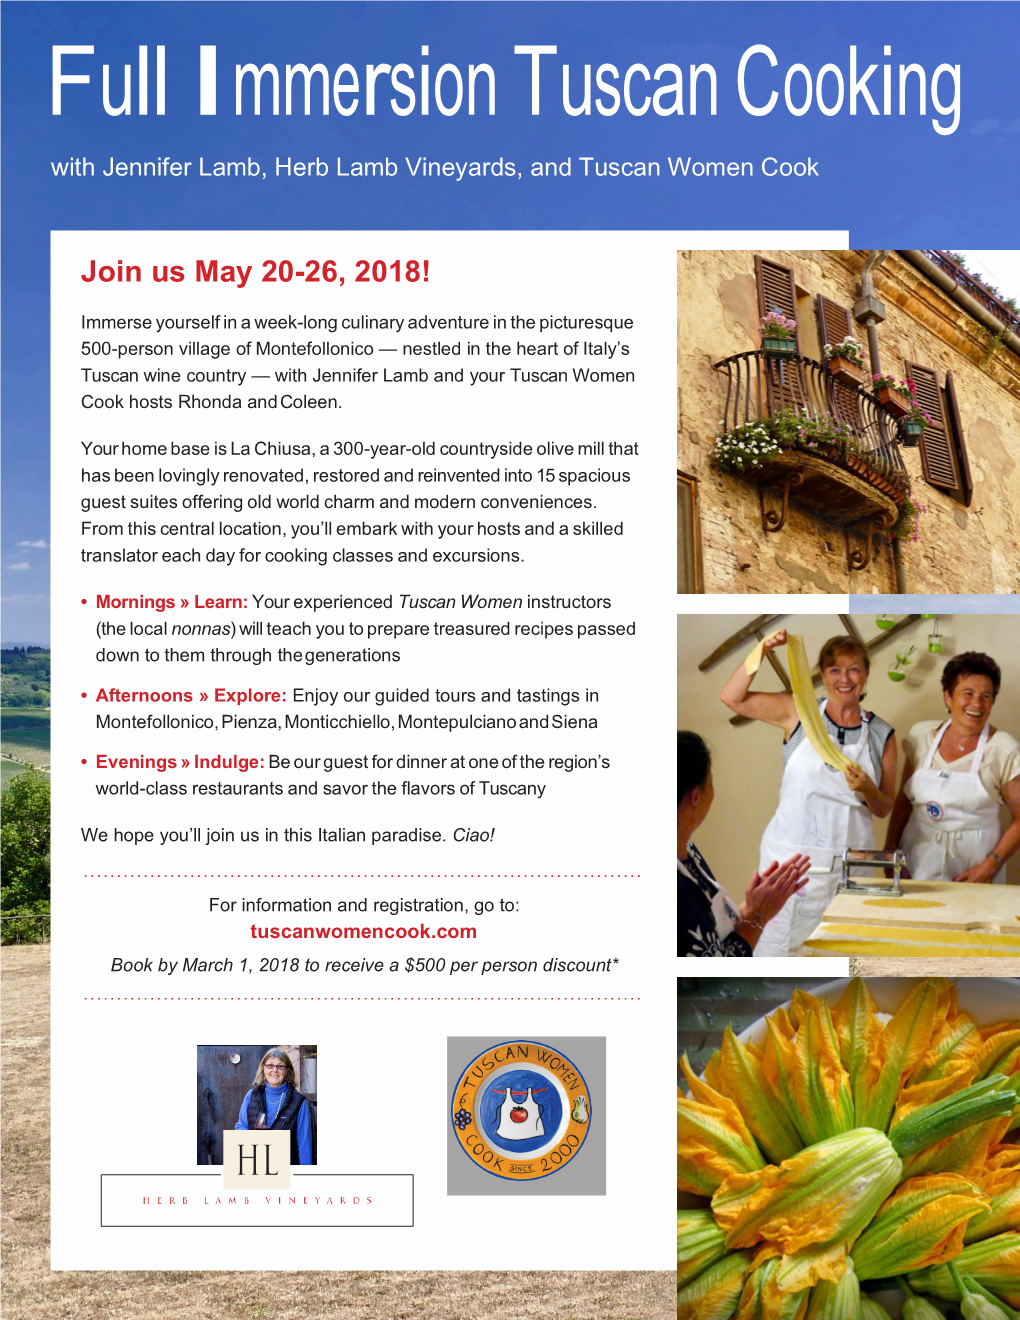 Full Immersion Tuscan Cooking with Jennifer Lamb, Herb Lamb Vineyards, and Tuscan Women Cook